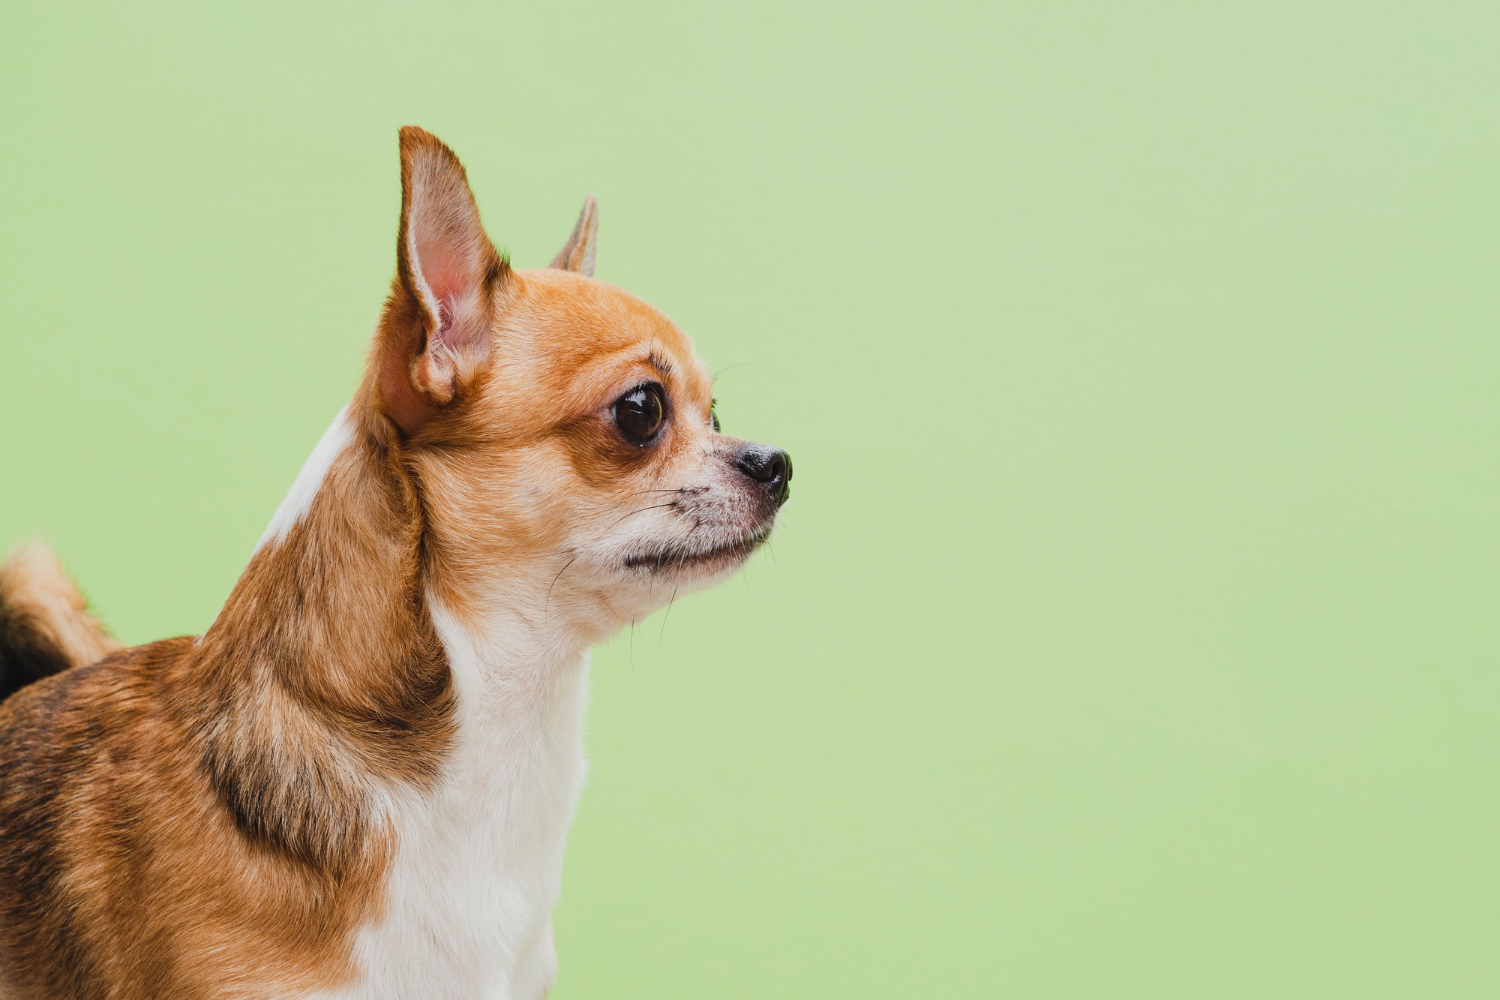 How to get my chihuahua to stop barking?